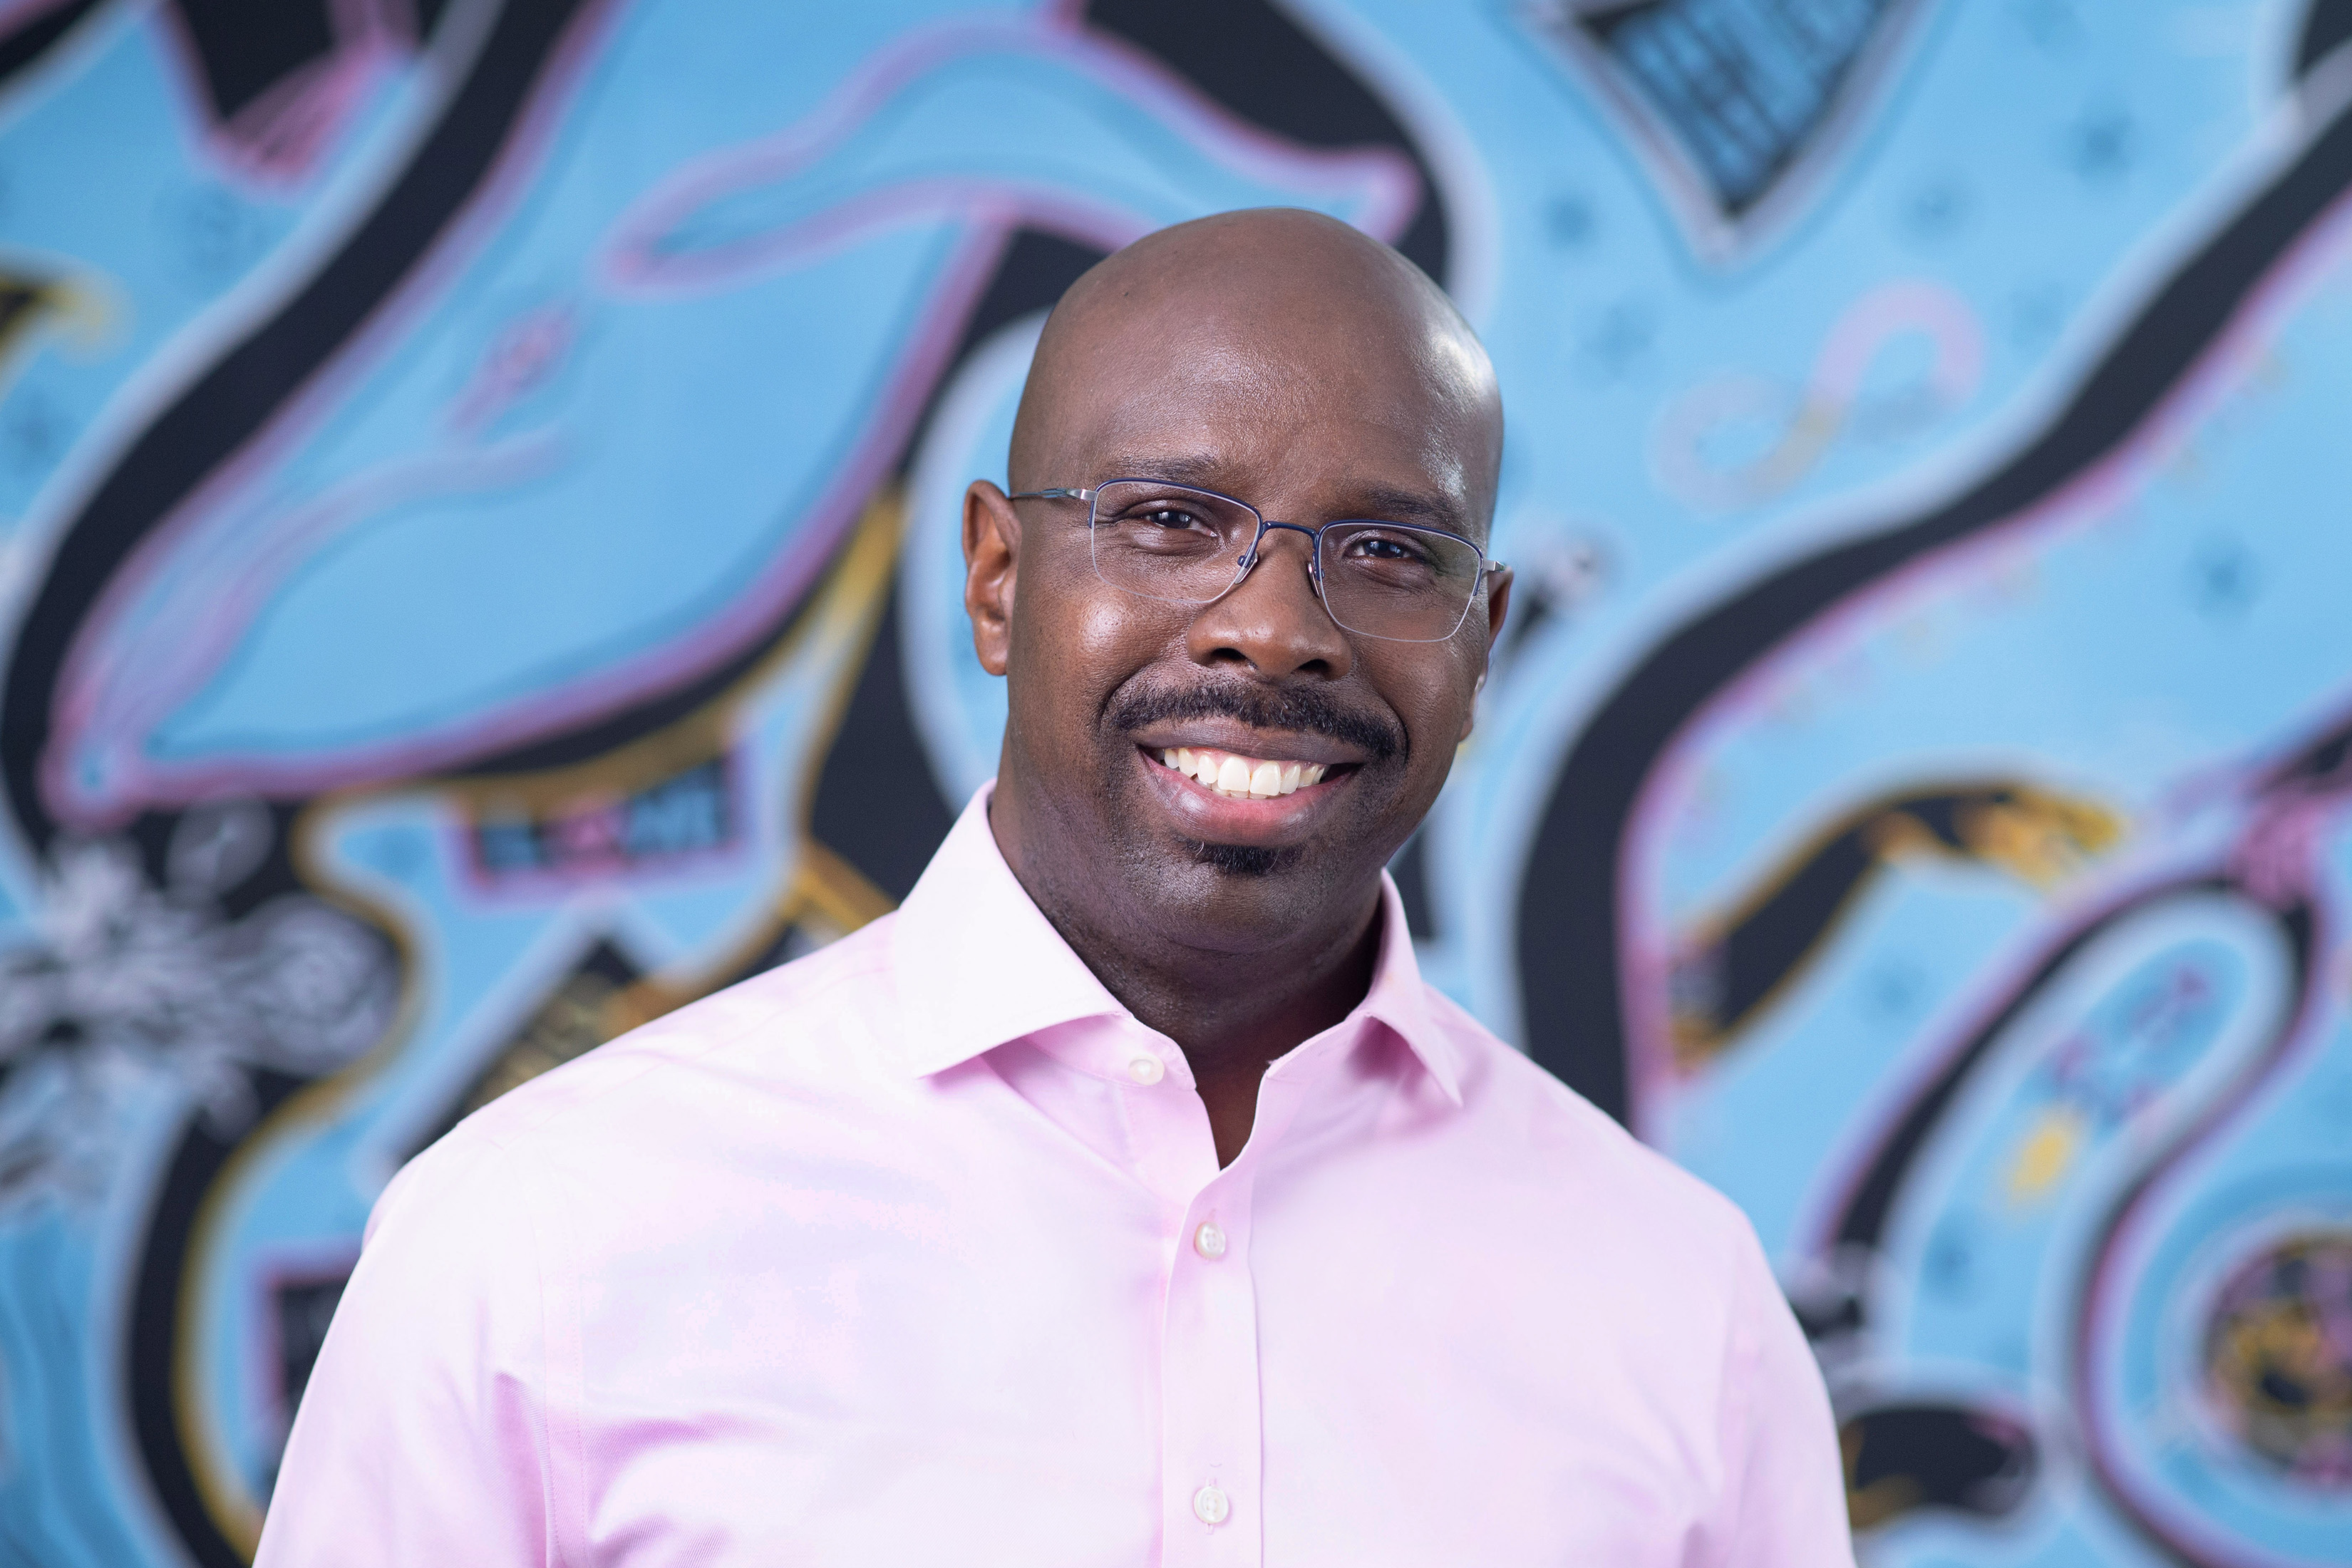 Portrait of Michael G. Johnson wearing a pink shirt and standing in front of a blue background with black swirls.